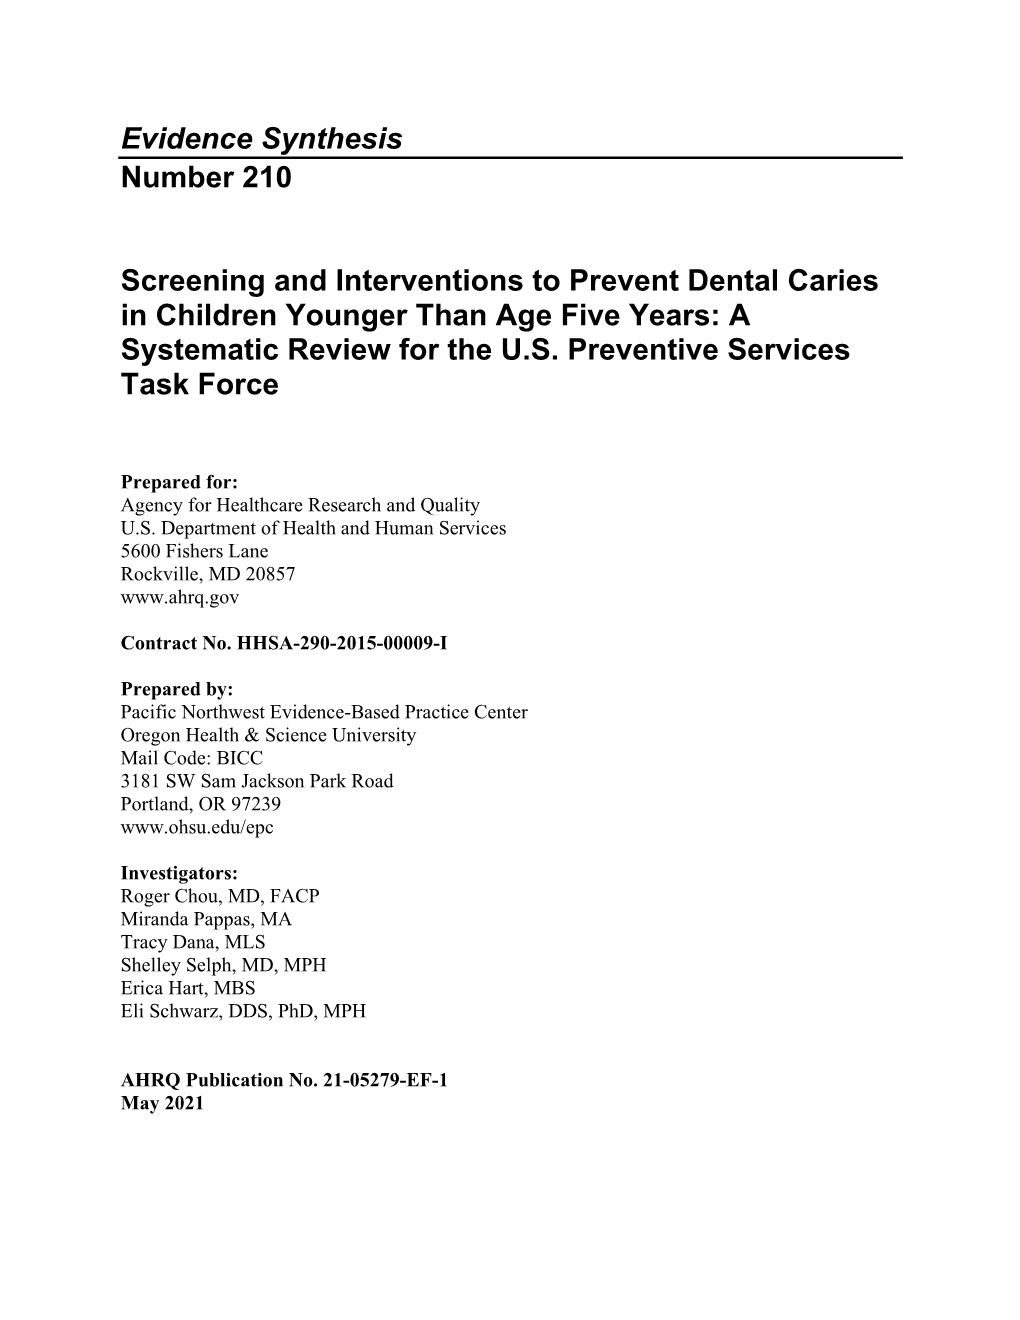 Screening and Interventions to Prevent Dental Caries in Children Younger Than Age Five Years: a Systematic Review for the U.S